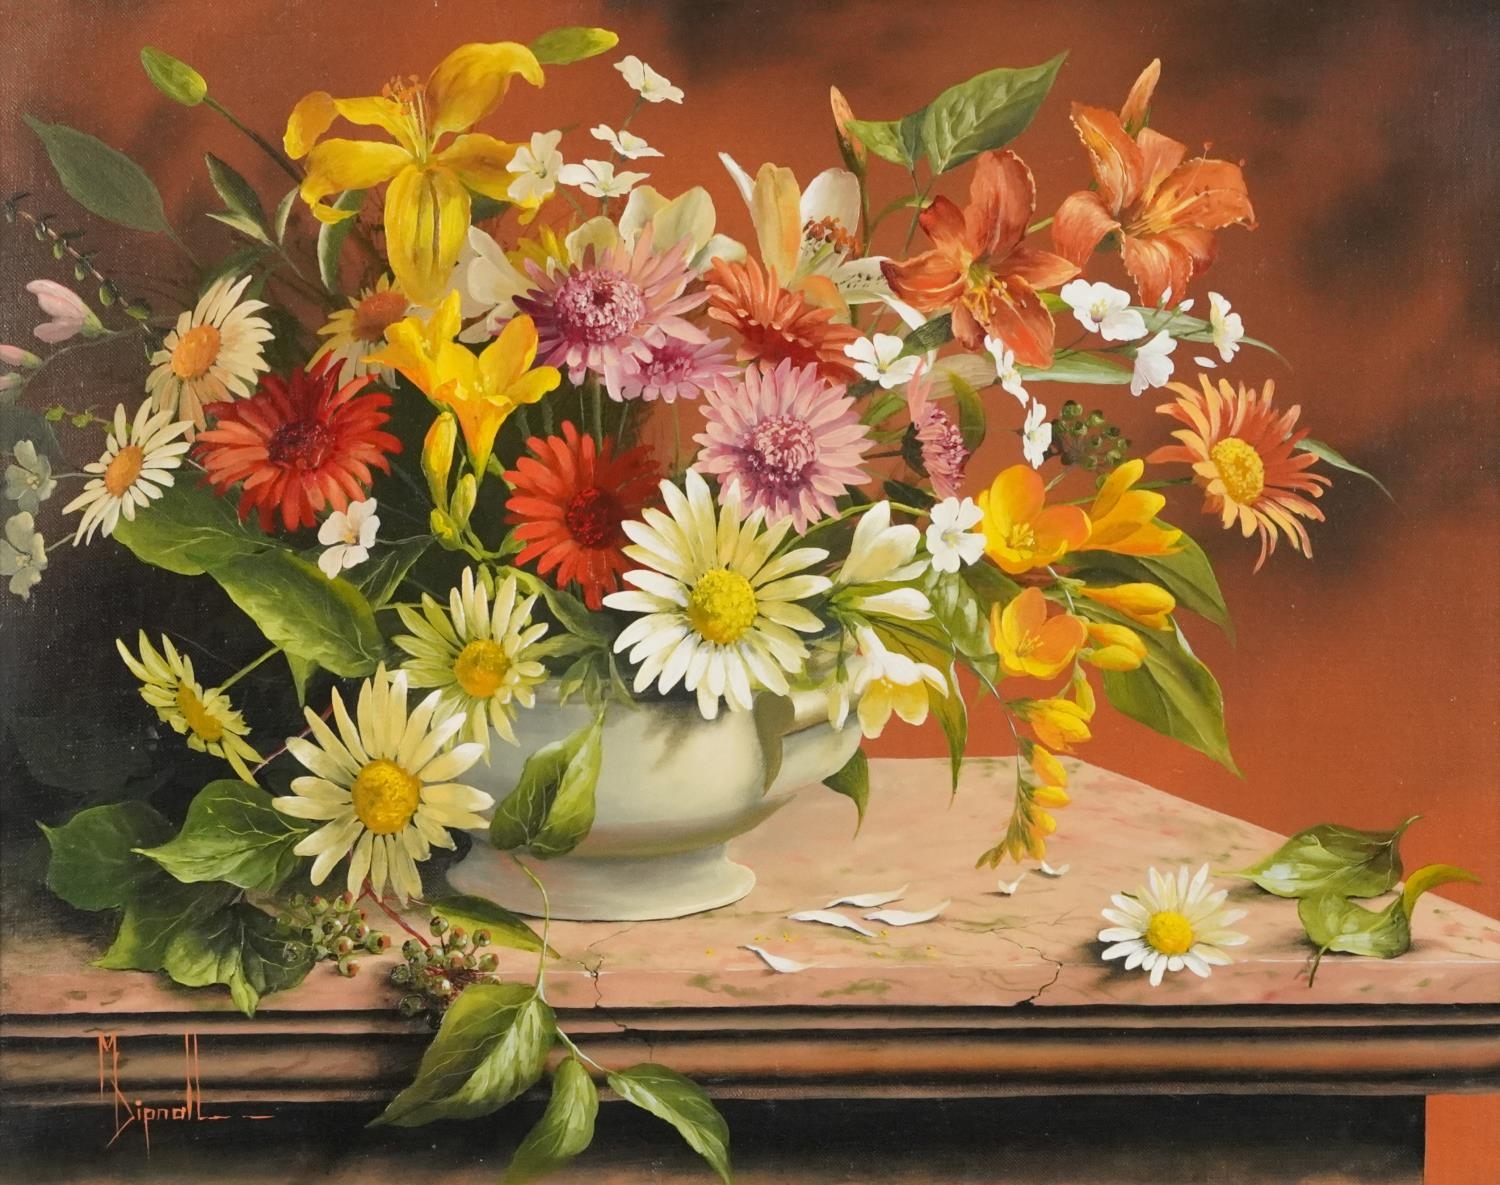 Mary Dipnall - Still life flowers, contemporary oil on canvas, mounted and framed, 49cm x 39cm